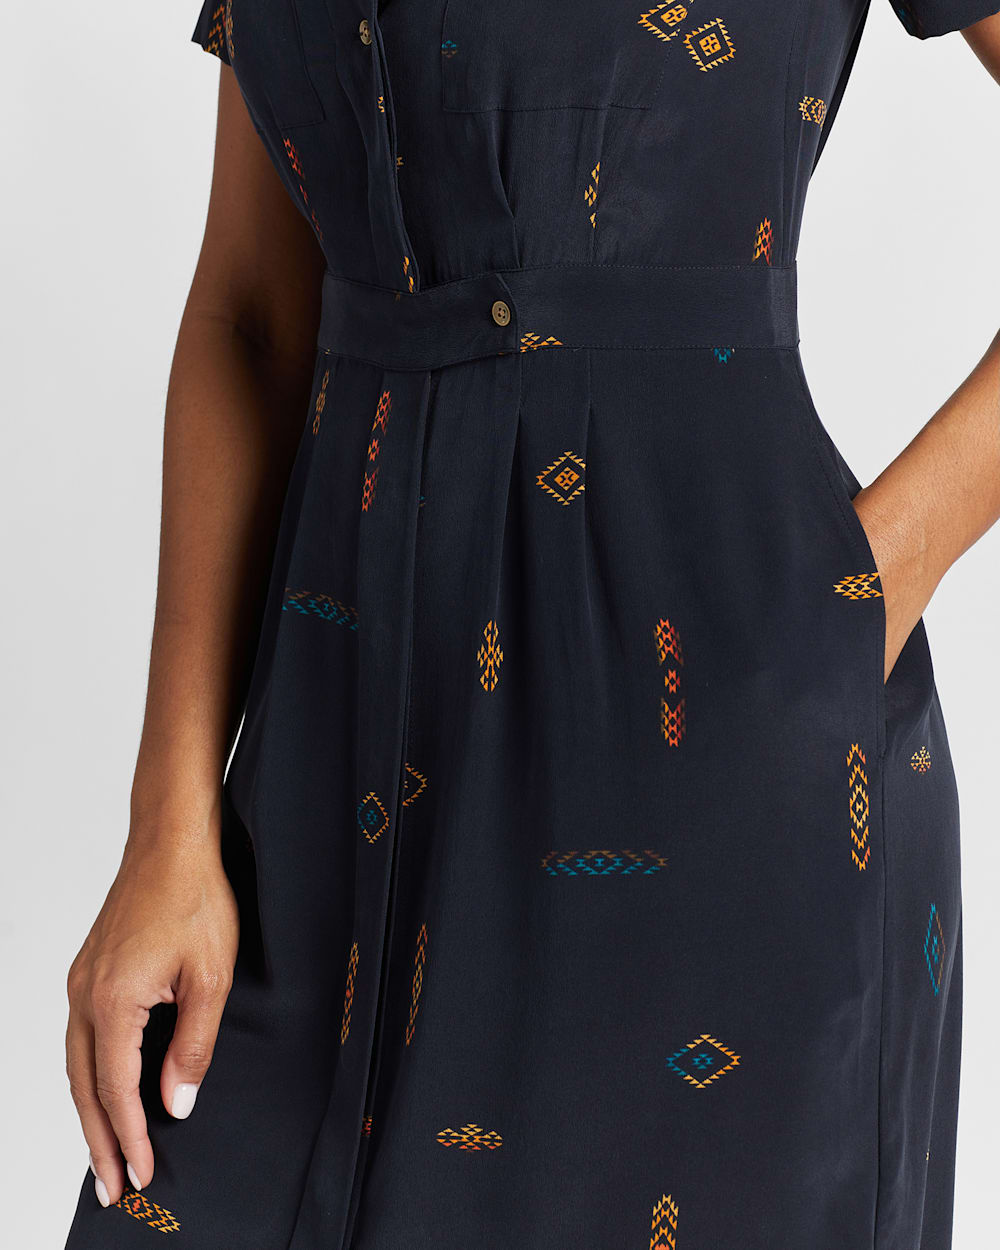 ALTERNATE VIEW OF WASHABLE SILK DRESS IN MIDNIGHT NAVY MULTI image number 4